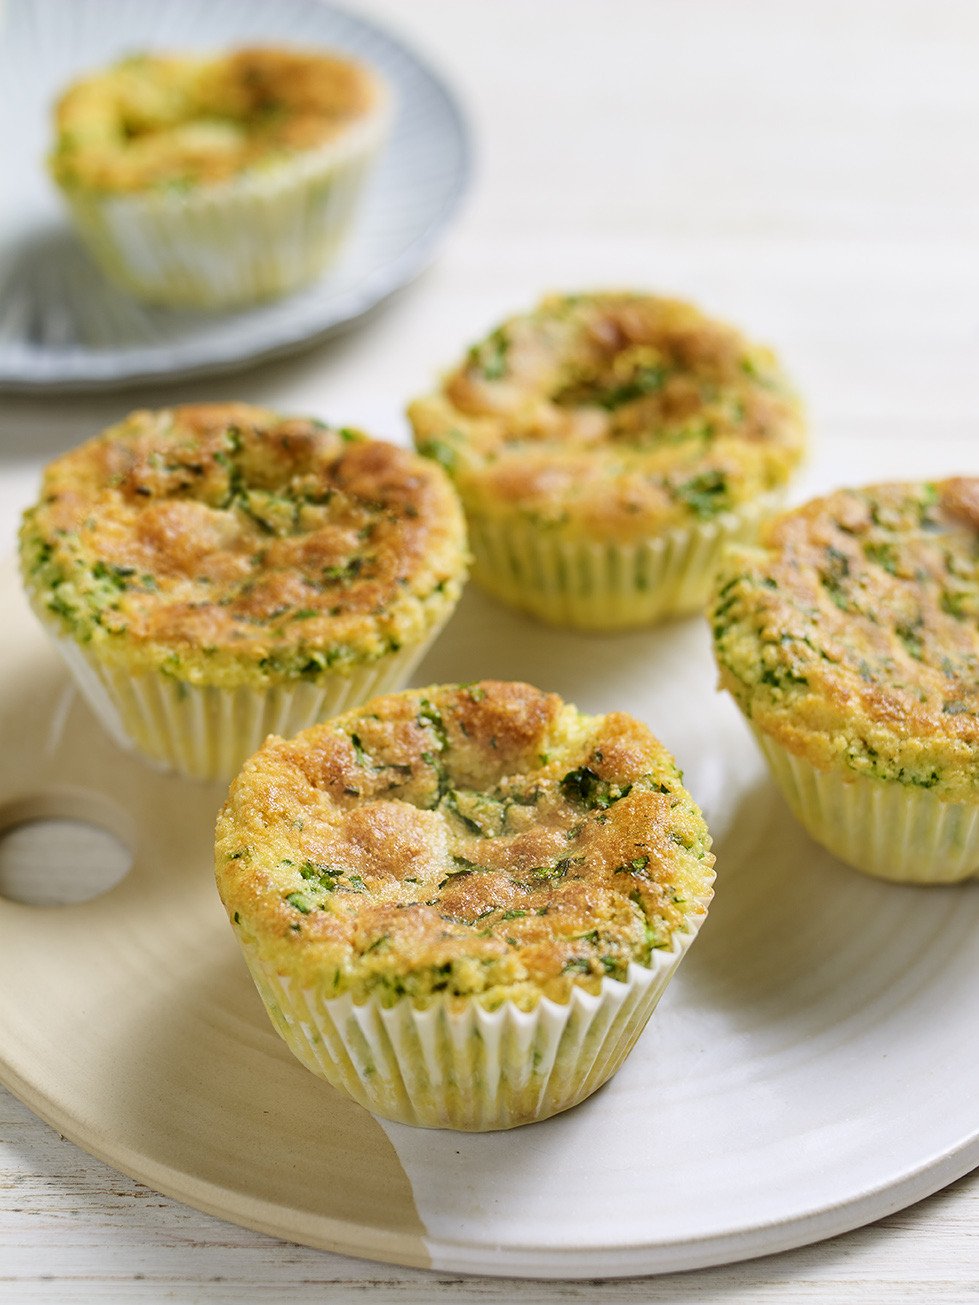 Keto Ready Herby Muffins